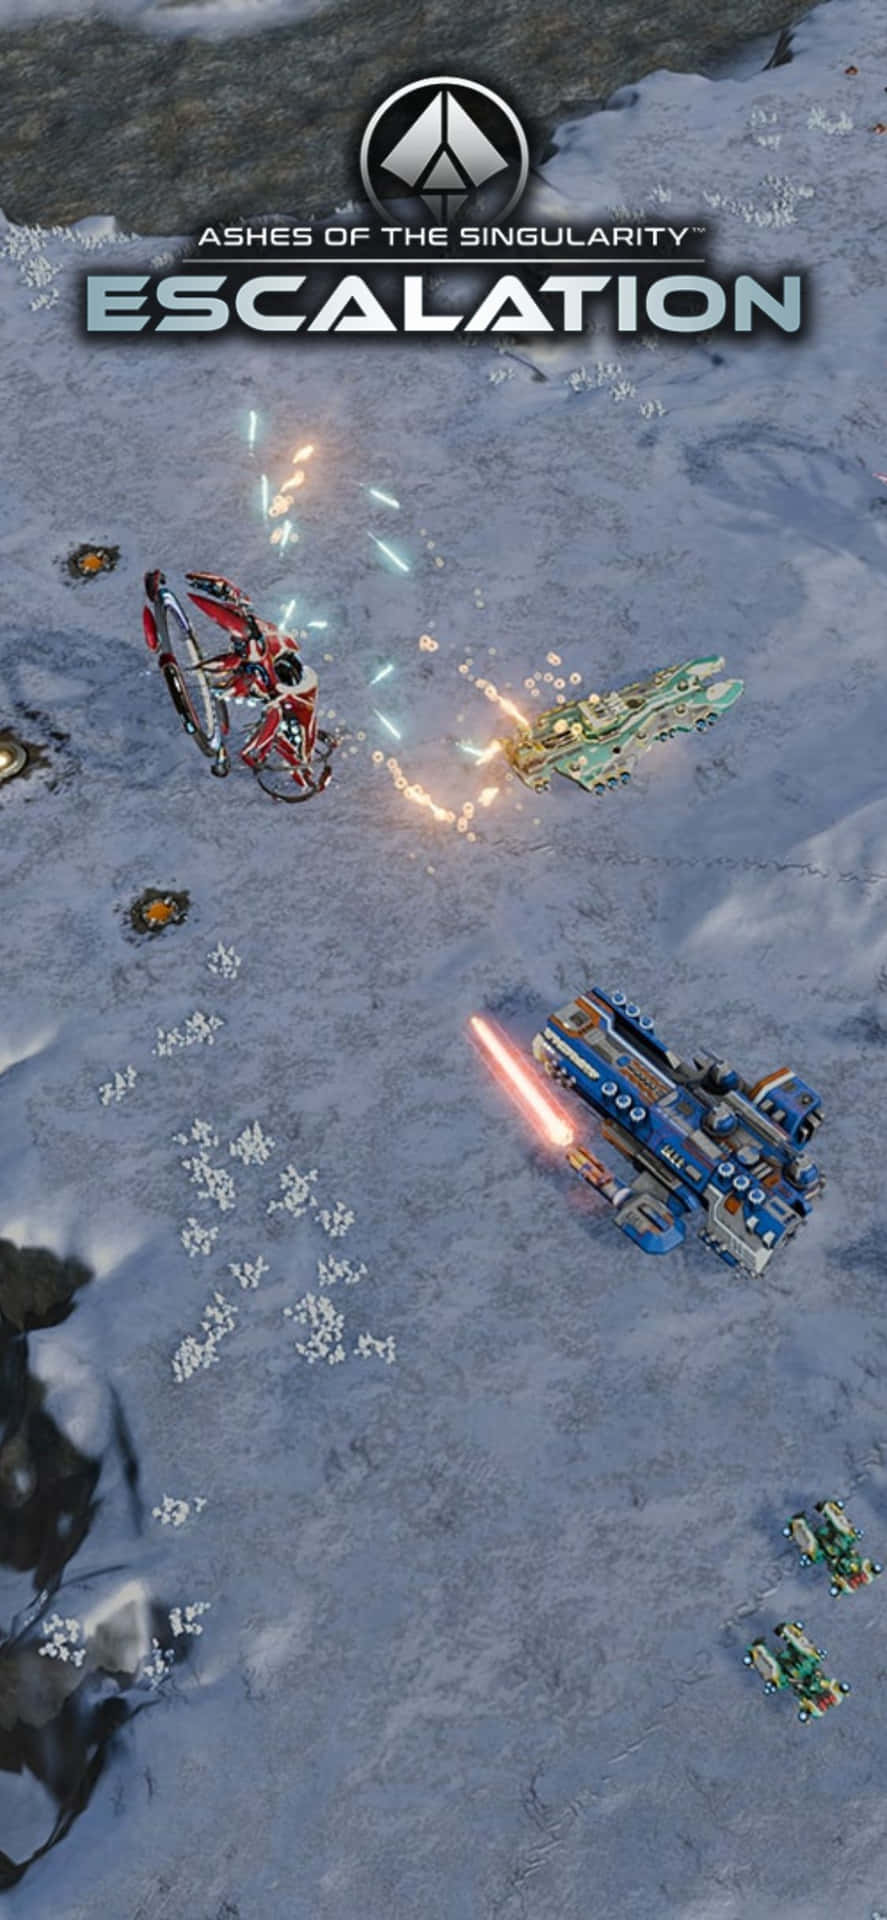 The Perfect Combination - Iphone X and Ashes of the Singularity Escalation